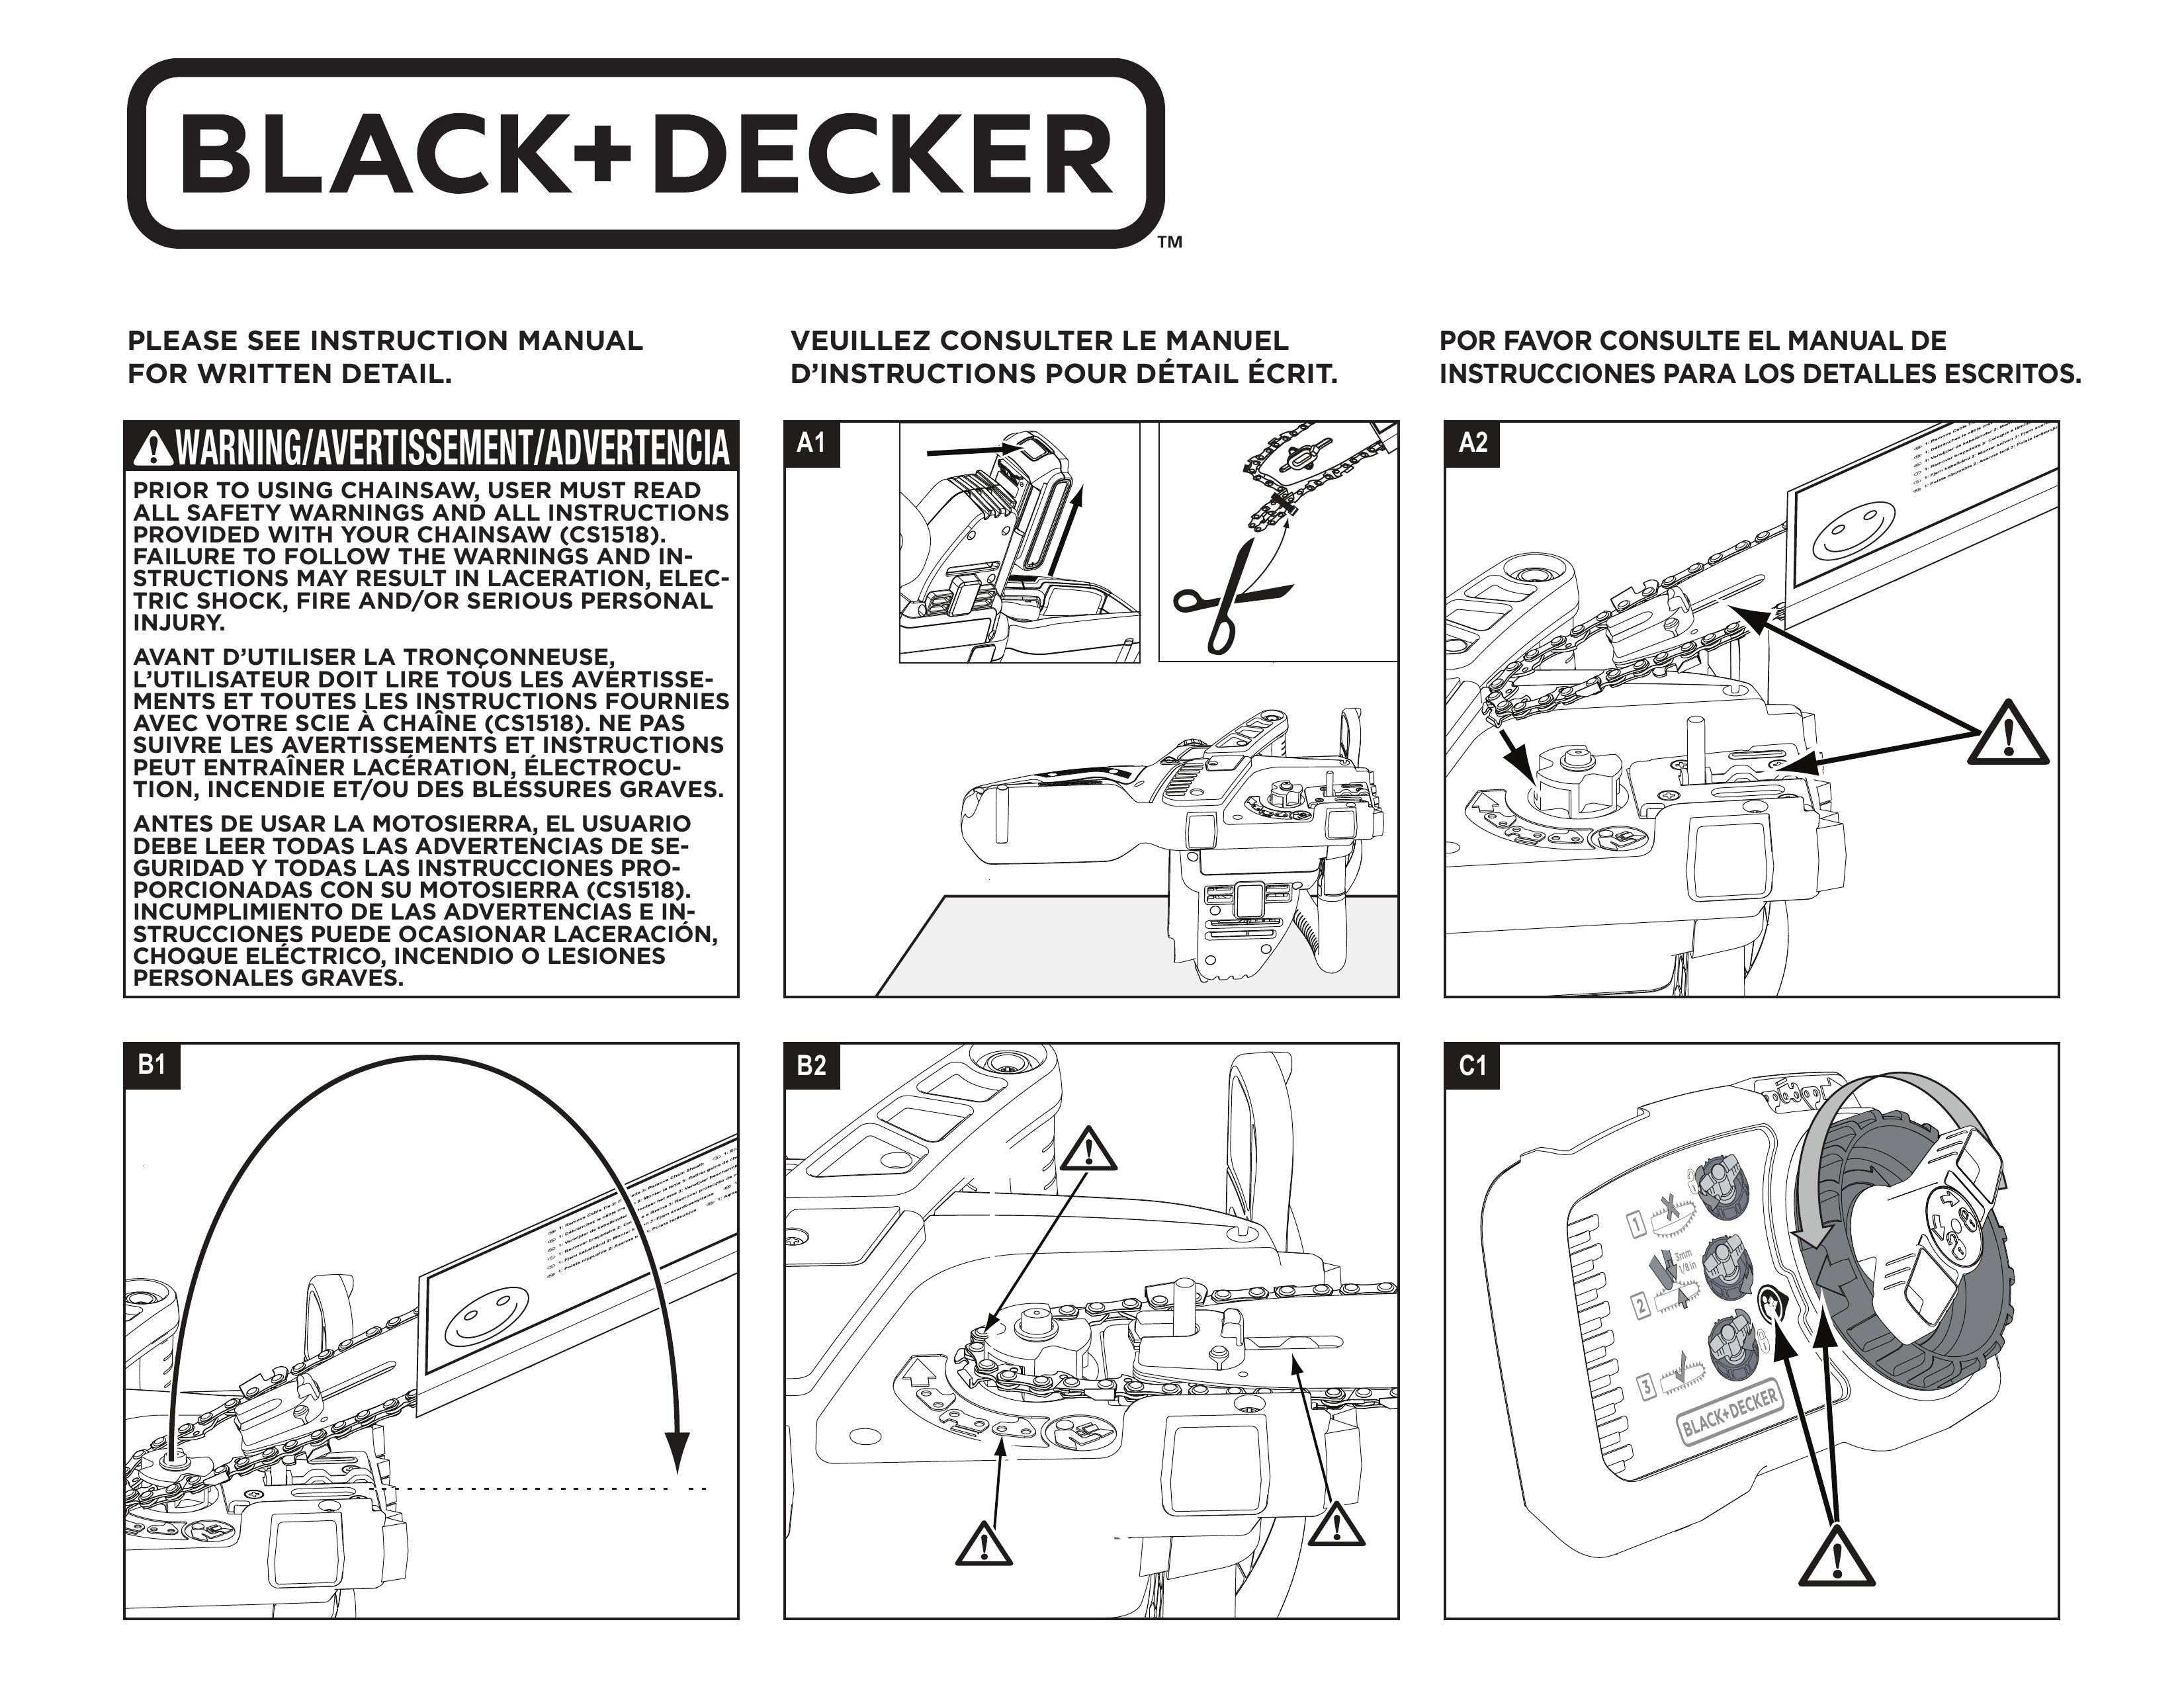 Black & Decker LCS1020 Brush Cutter User Manual (Page 1)